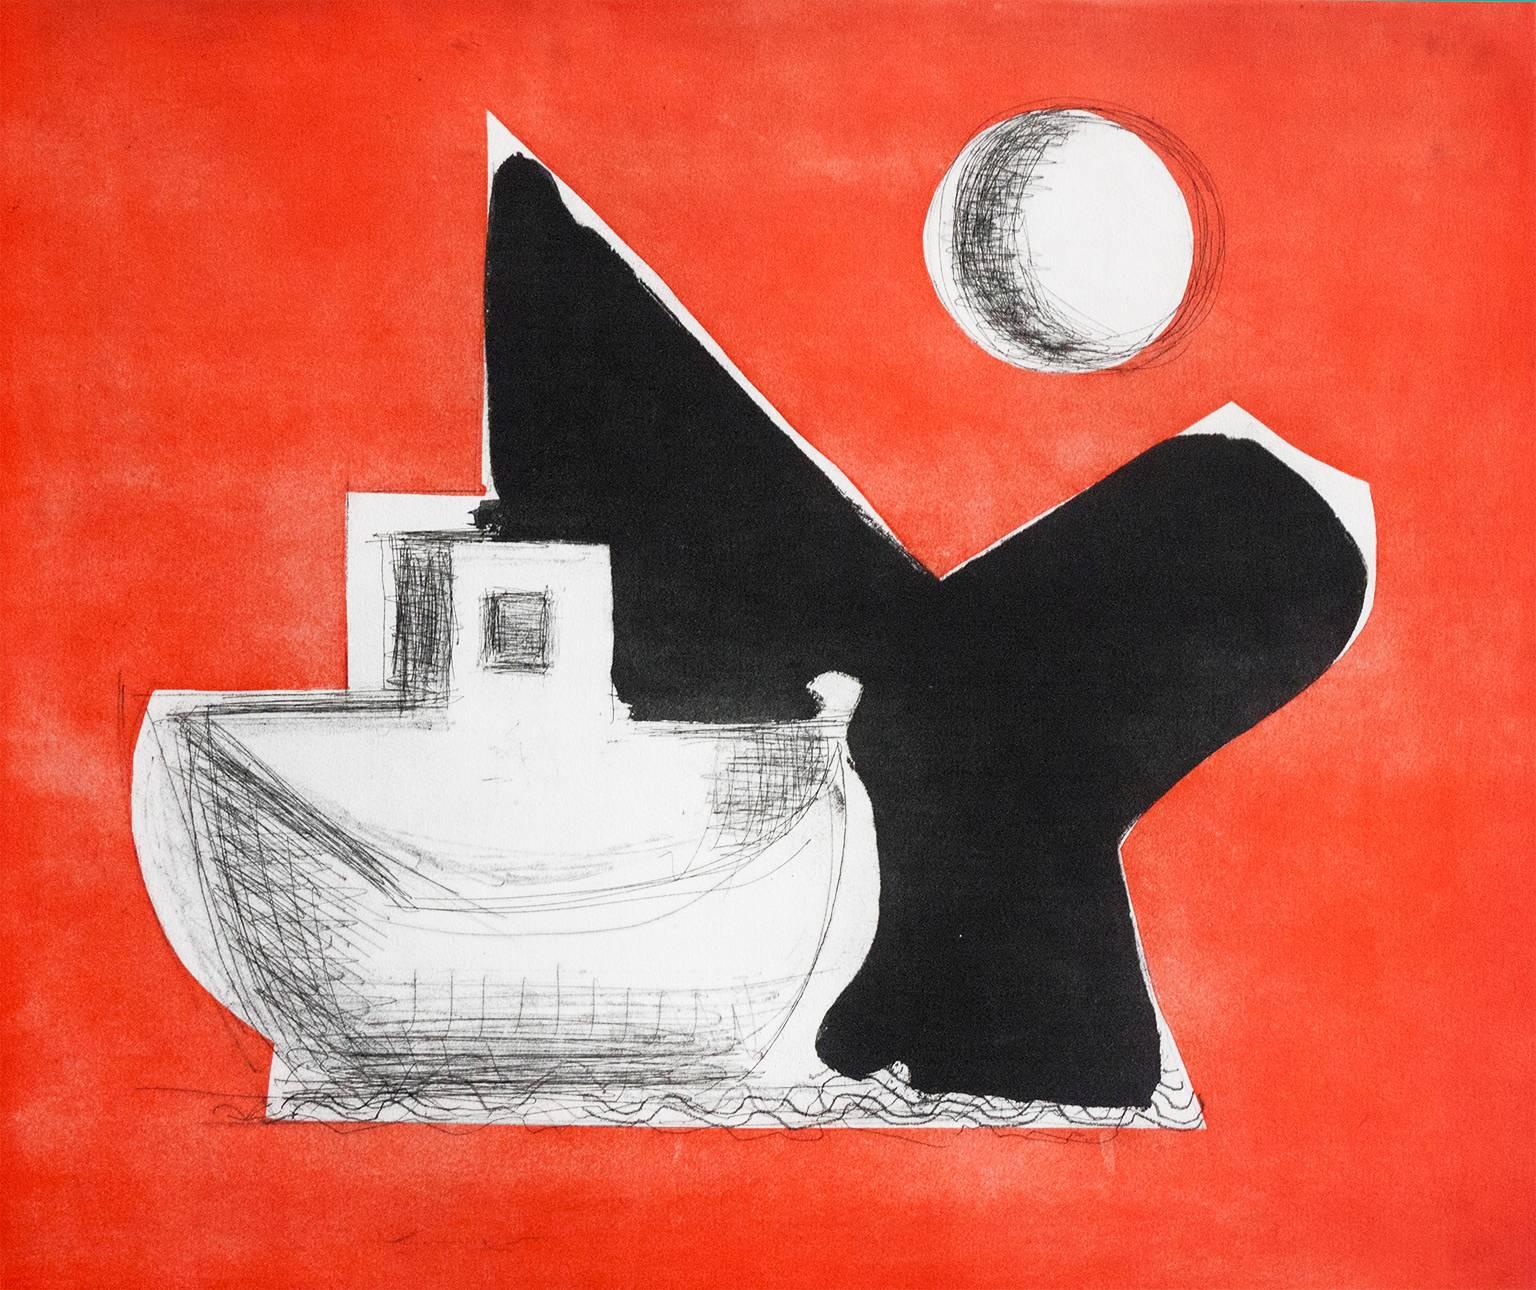 Paul Resika Landscape Print - "Red And Black", abstract seascape etching, aquatint print, Cape Cod.